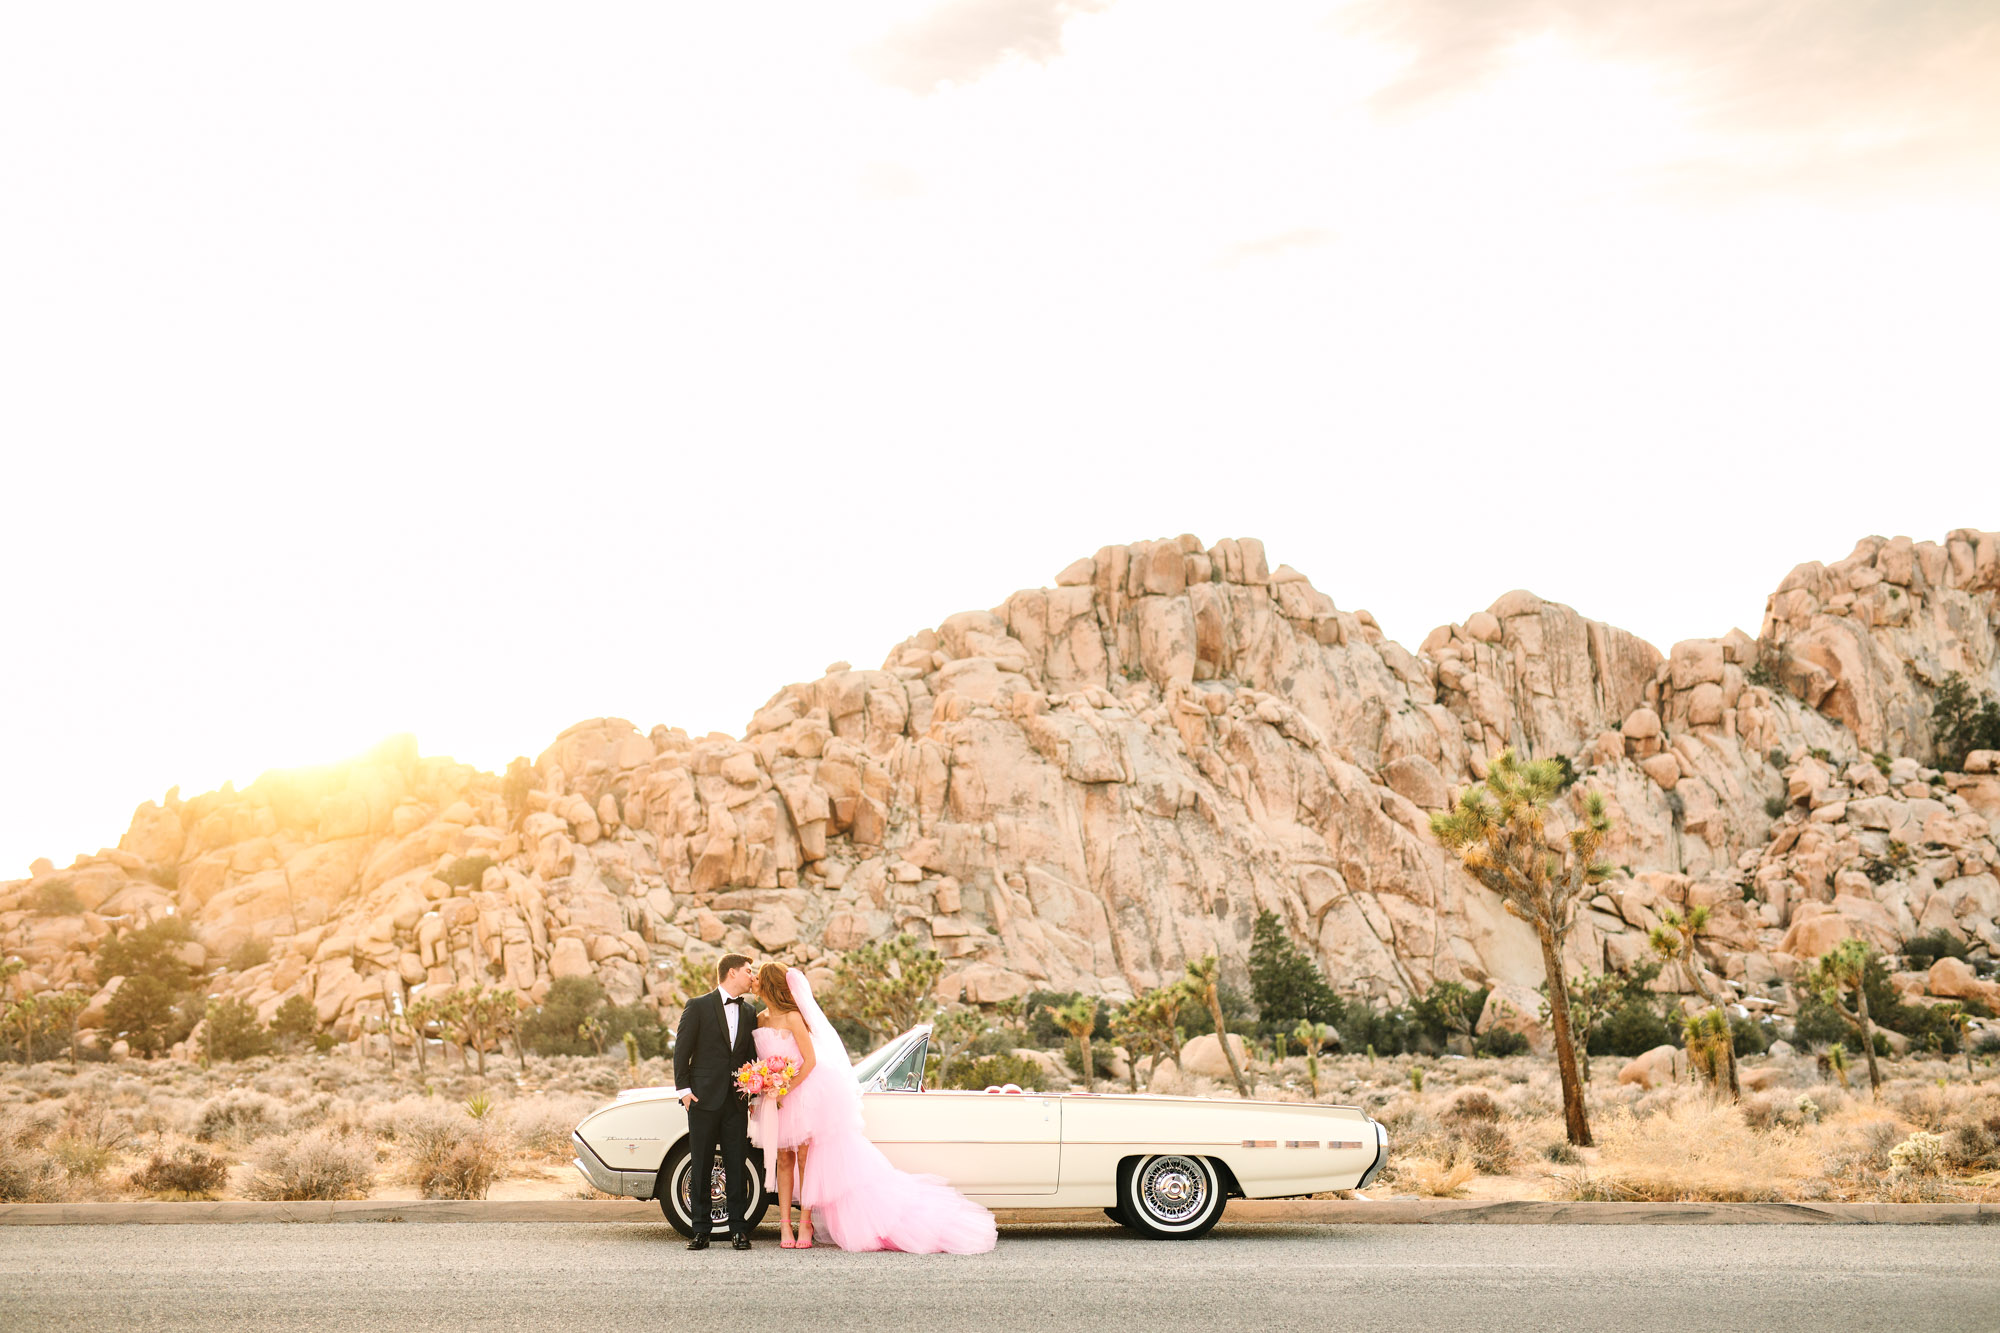 Bride and groom with white classic Ford Thunderbird convertible | Pink wedding dress Joshua Tree elopement featured on Green Wedding Shoes | Colorful desert wedding inspiration for fun-loving couples in Southern California #joshuatreewedding #joshuatreeelopement #pinkwedding #greenweddingshoes Source: Mary Costa Photography | Los Angeles